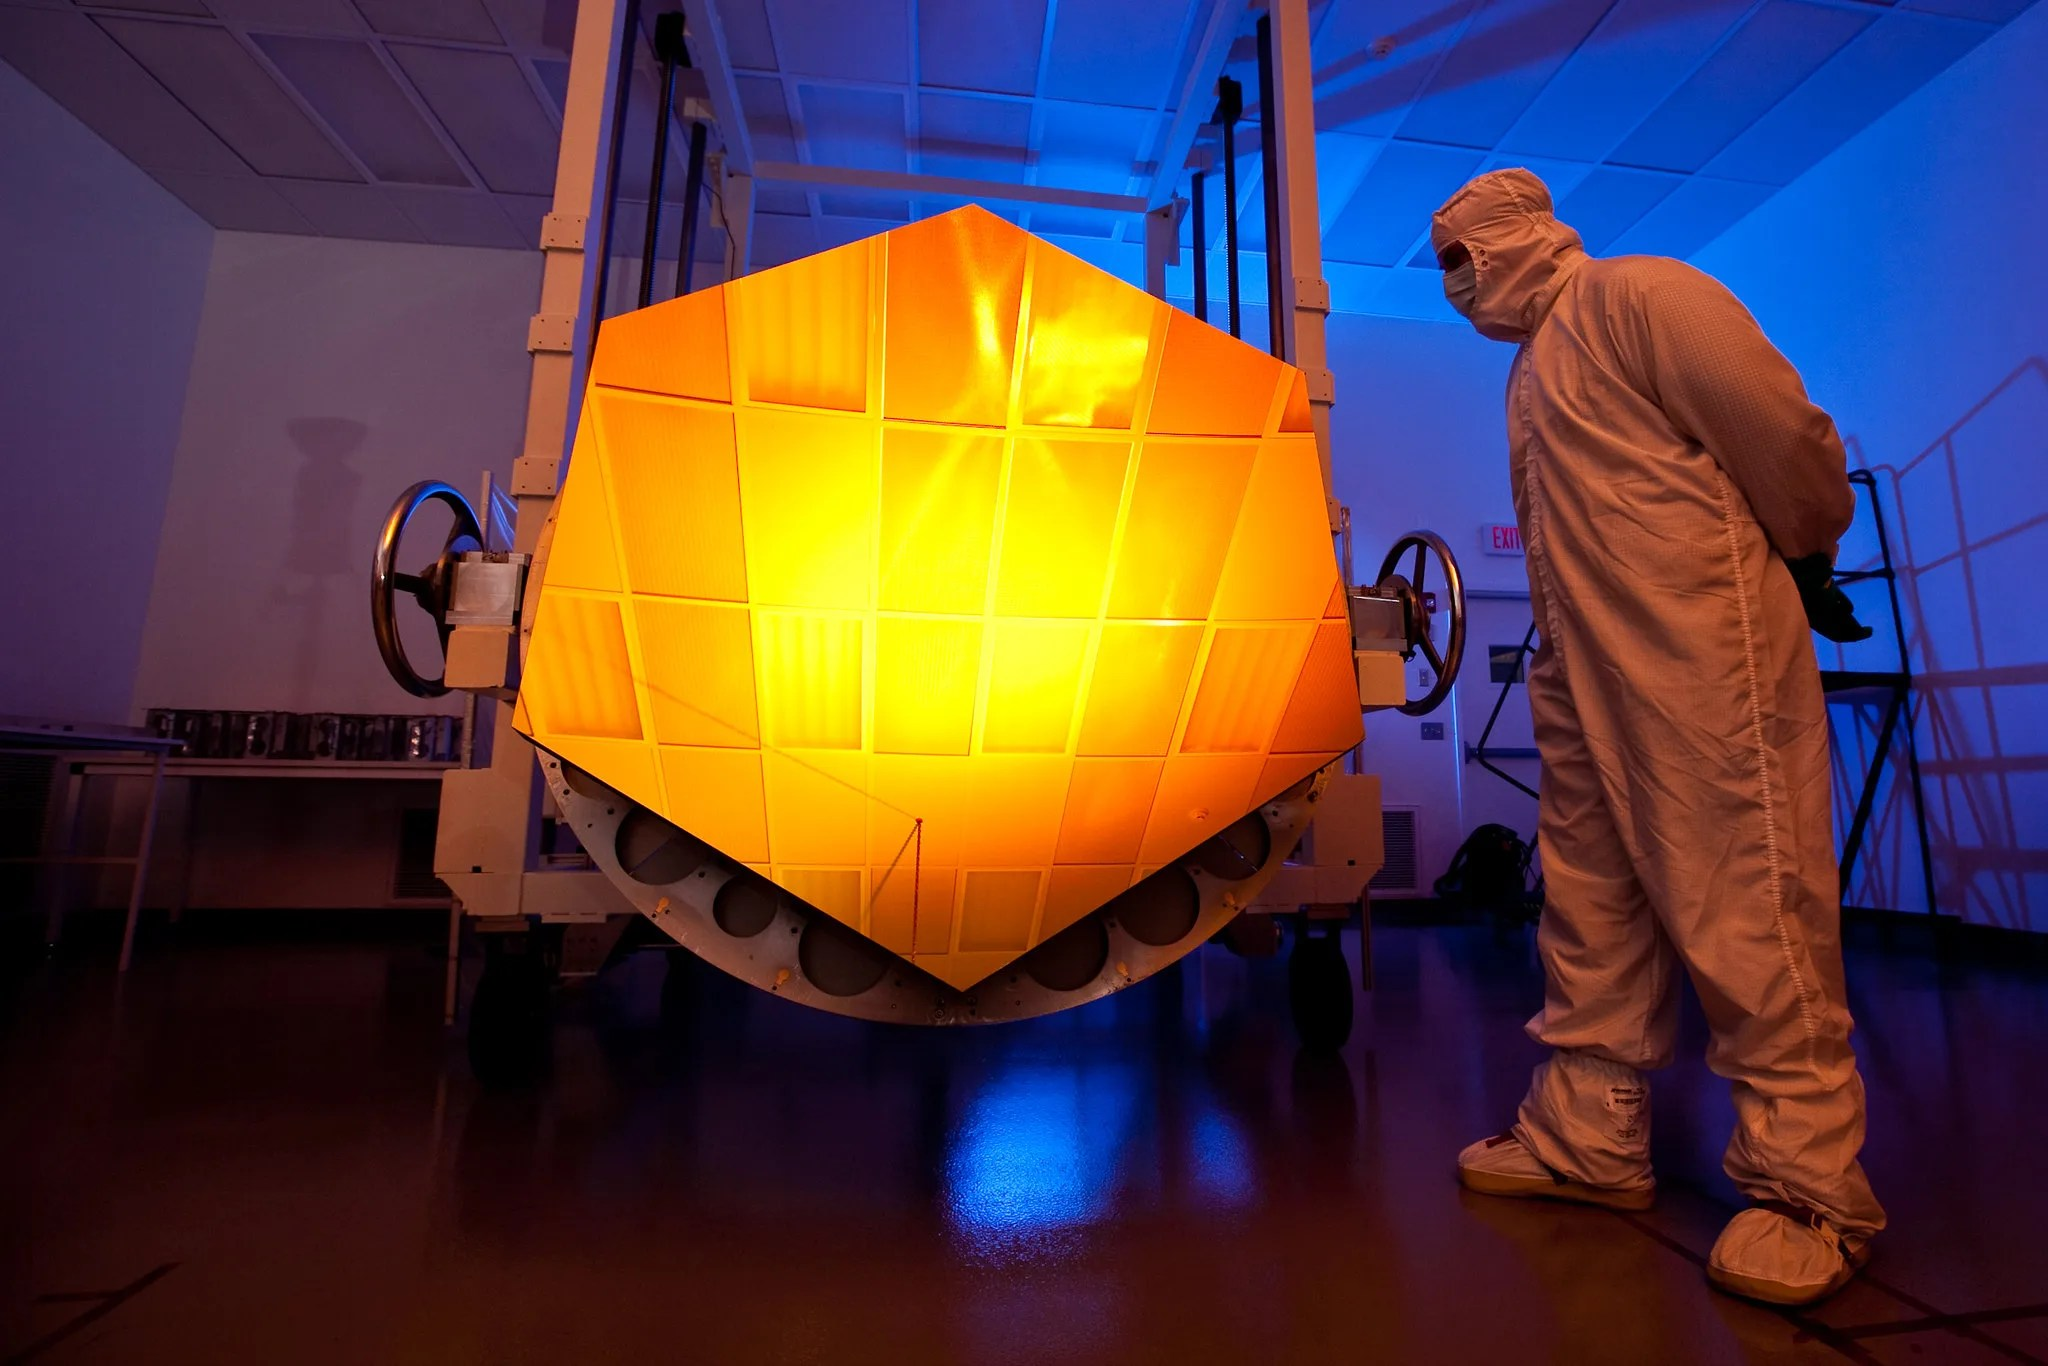 A Engineer looks over one of the James Webb Space Telescope's primary mirror segments.